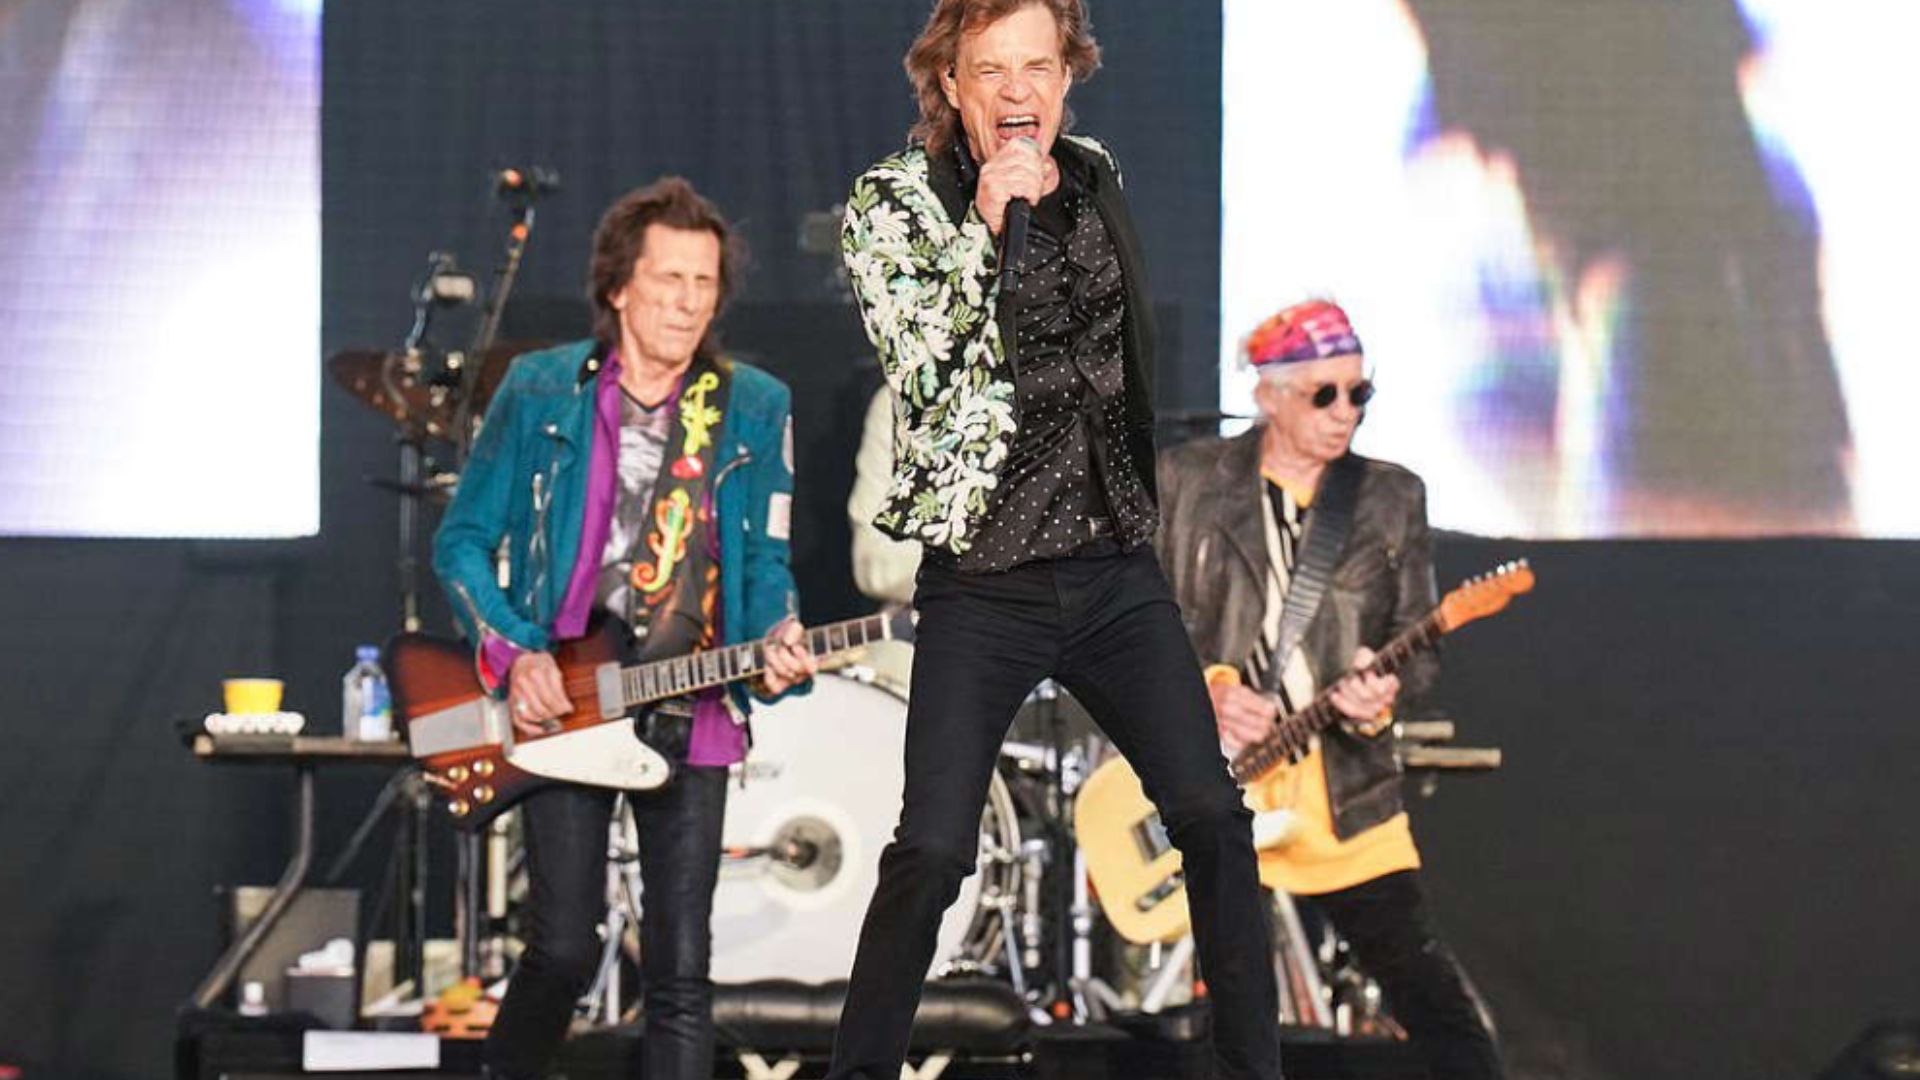 Mick Jagger is back battling fit as he gives enthusiastic execution